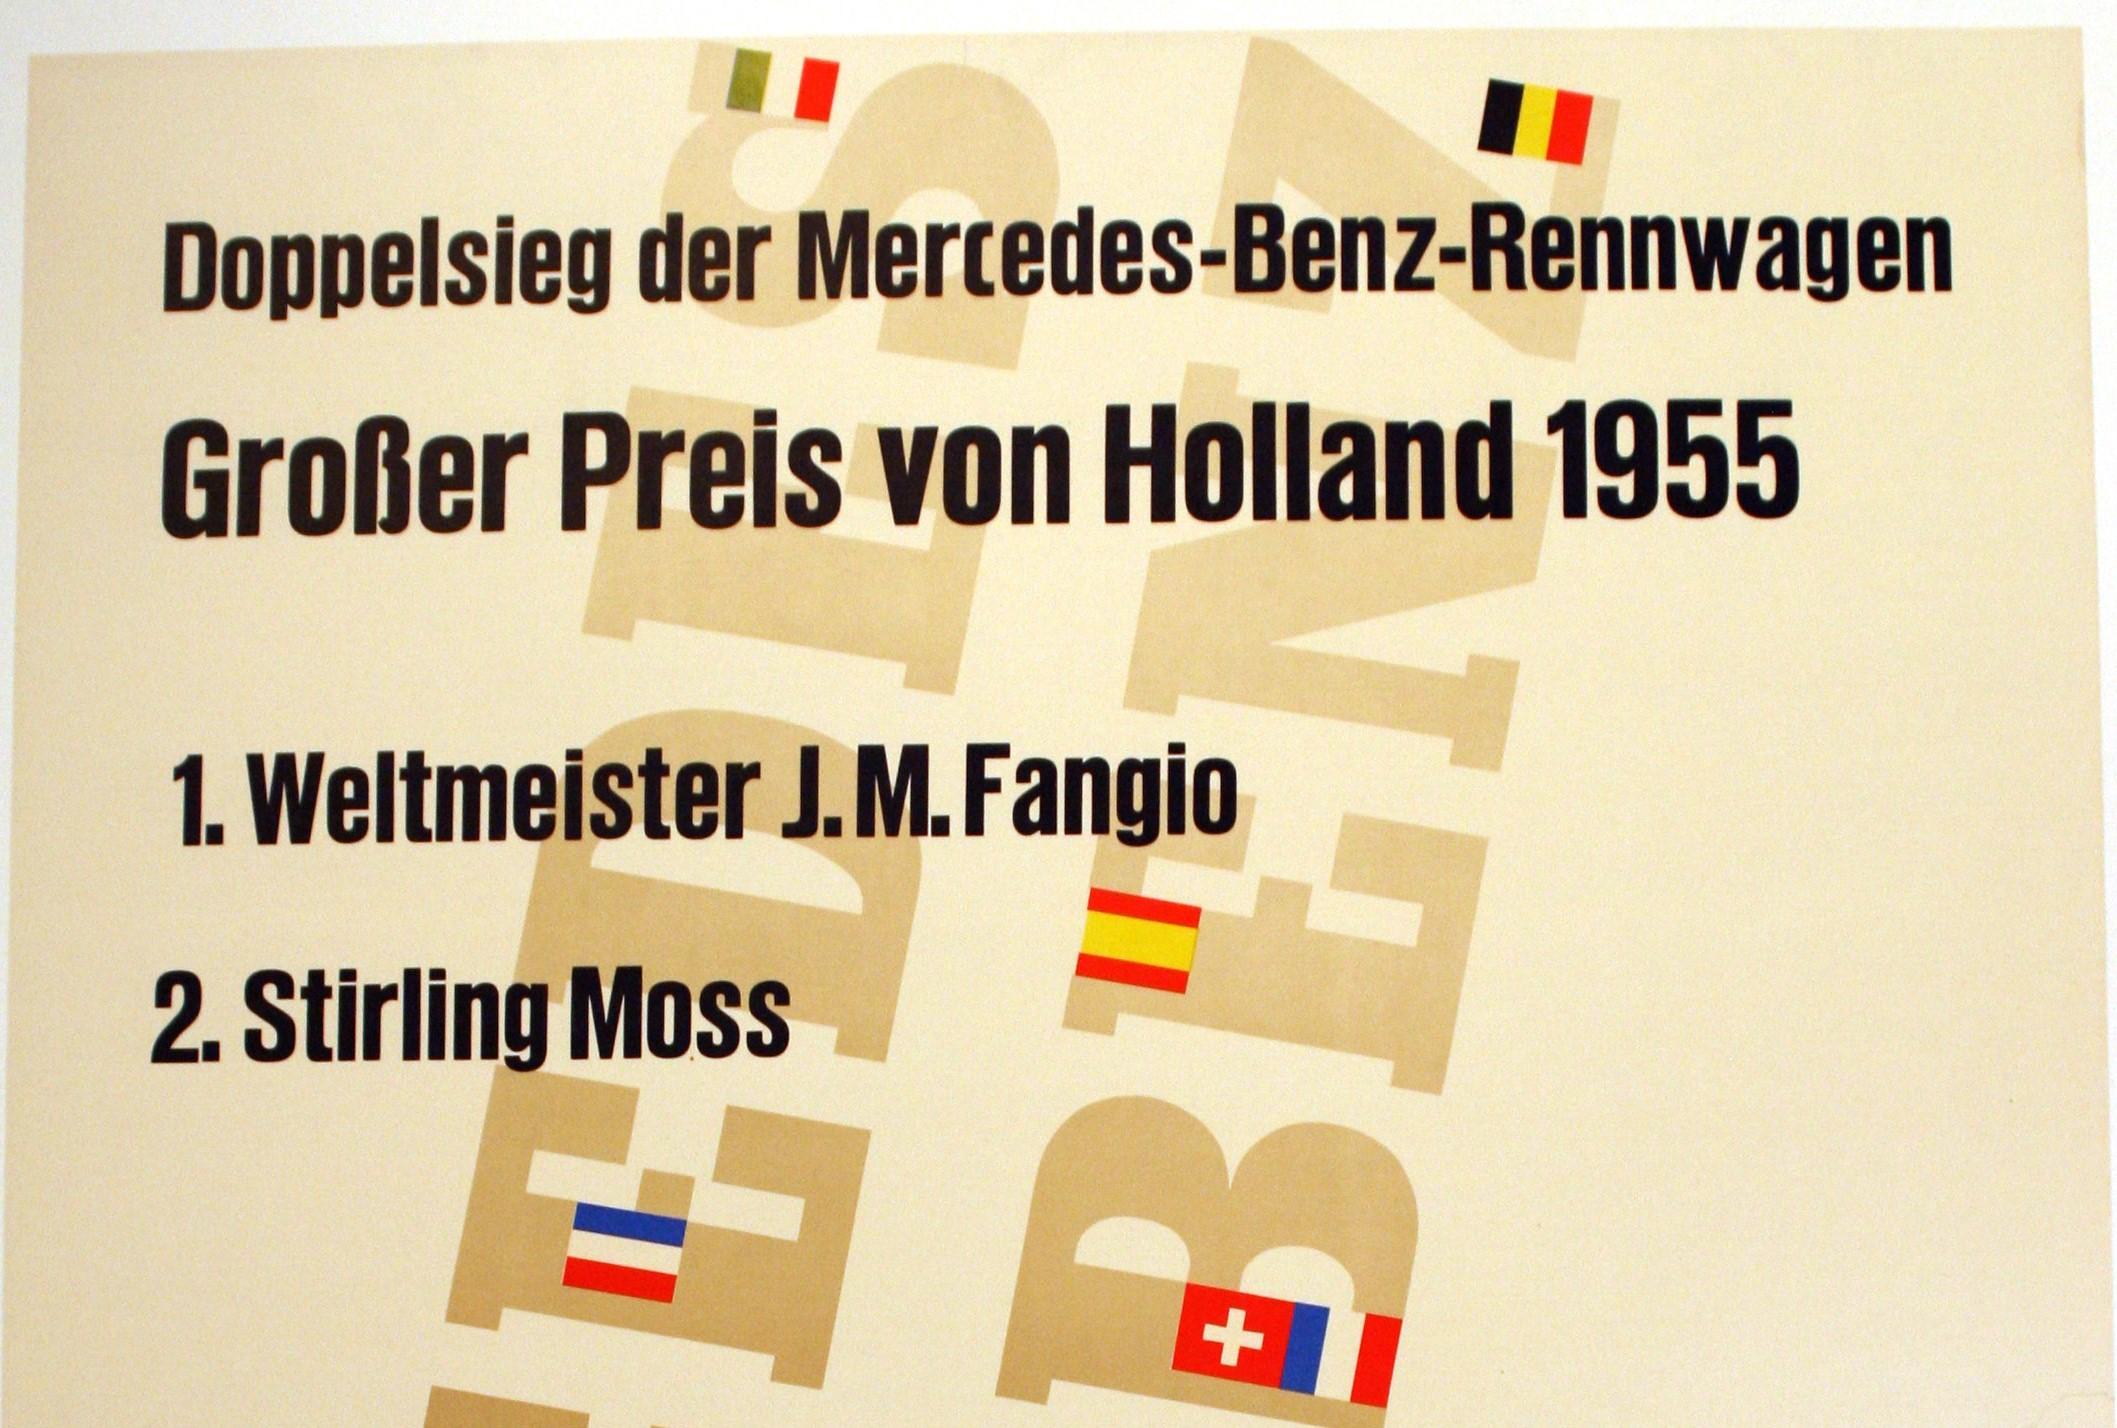 Original vintage poster advertising Mercedes Benz victory in Holland Grand Prix in 1955. The 1955 Dutch Grand Prix was a Formula One motor race held at Zandvoort on June 19, 1955. It was race 5 of 7 in the 1955 World Championship of Drivers. The